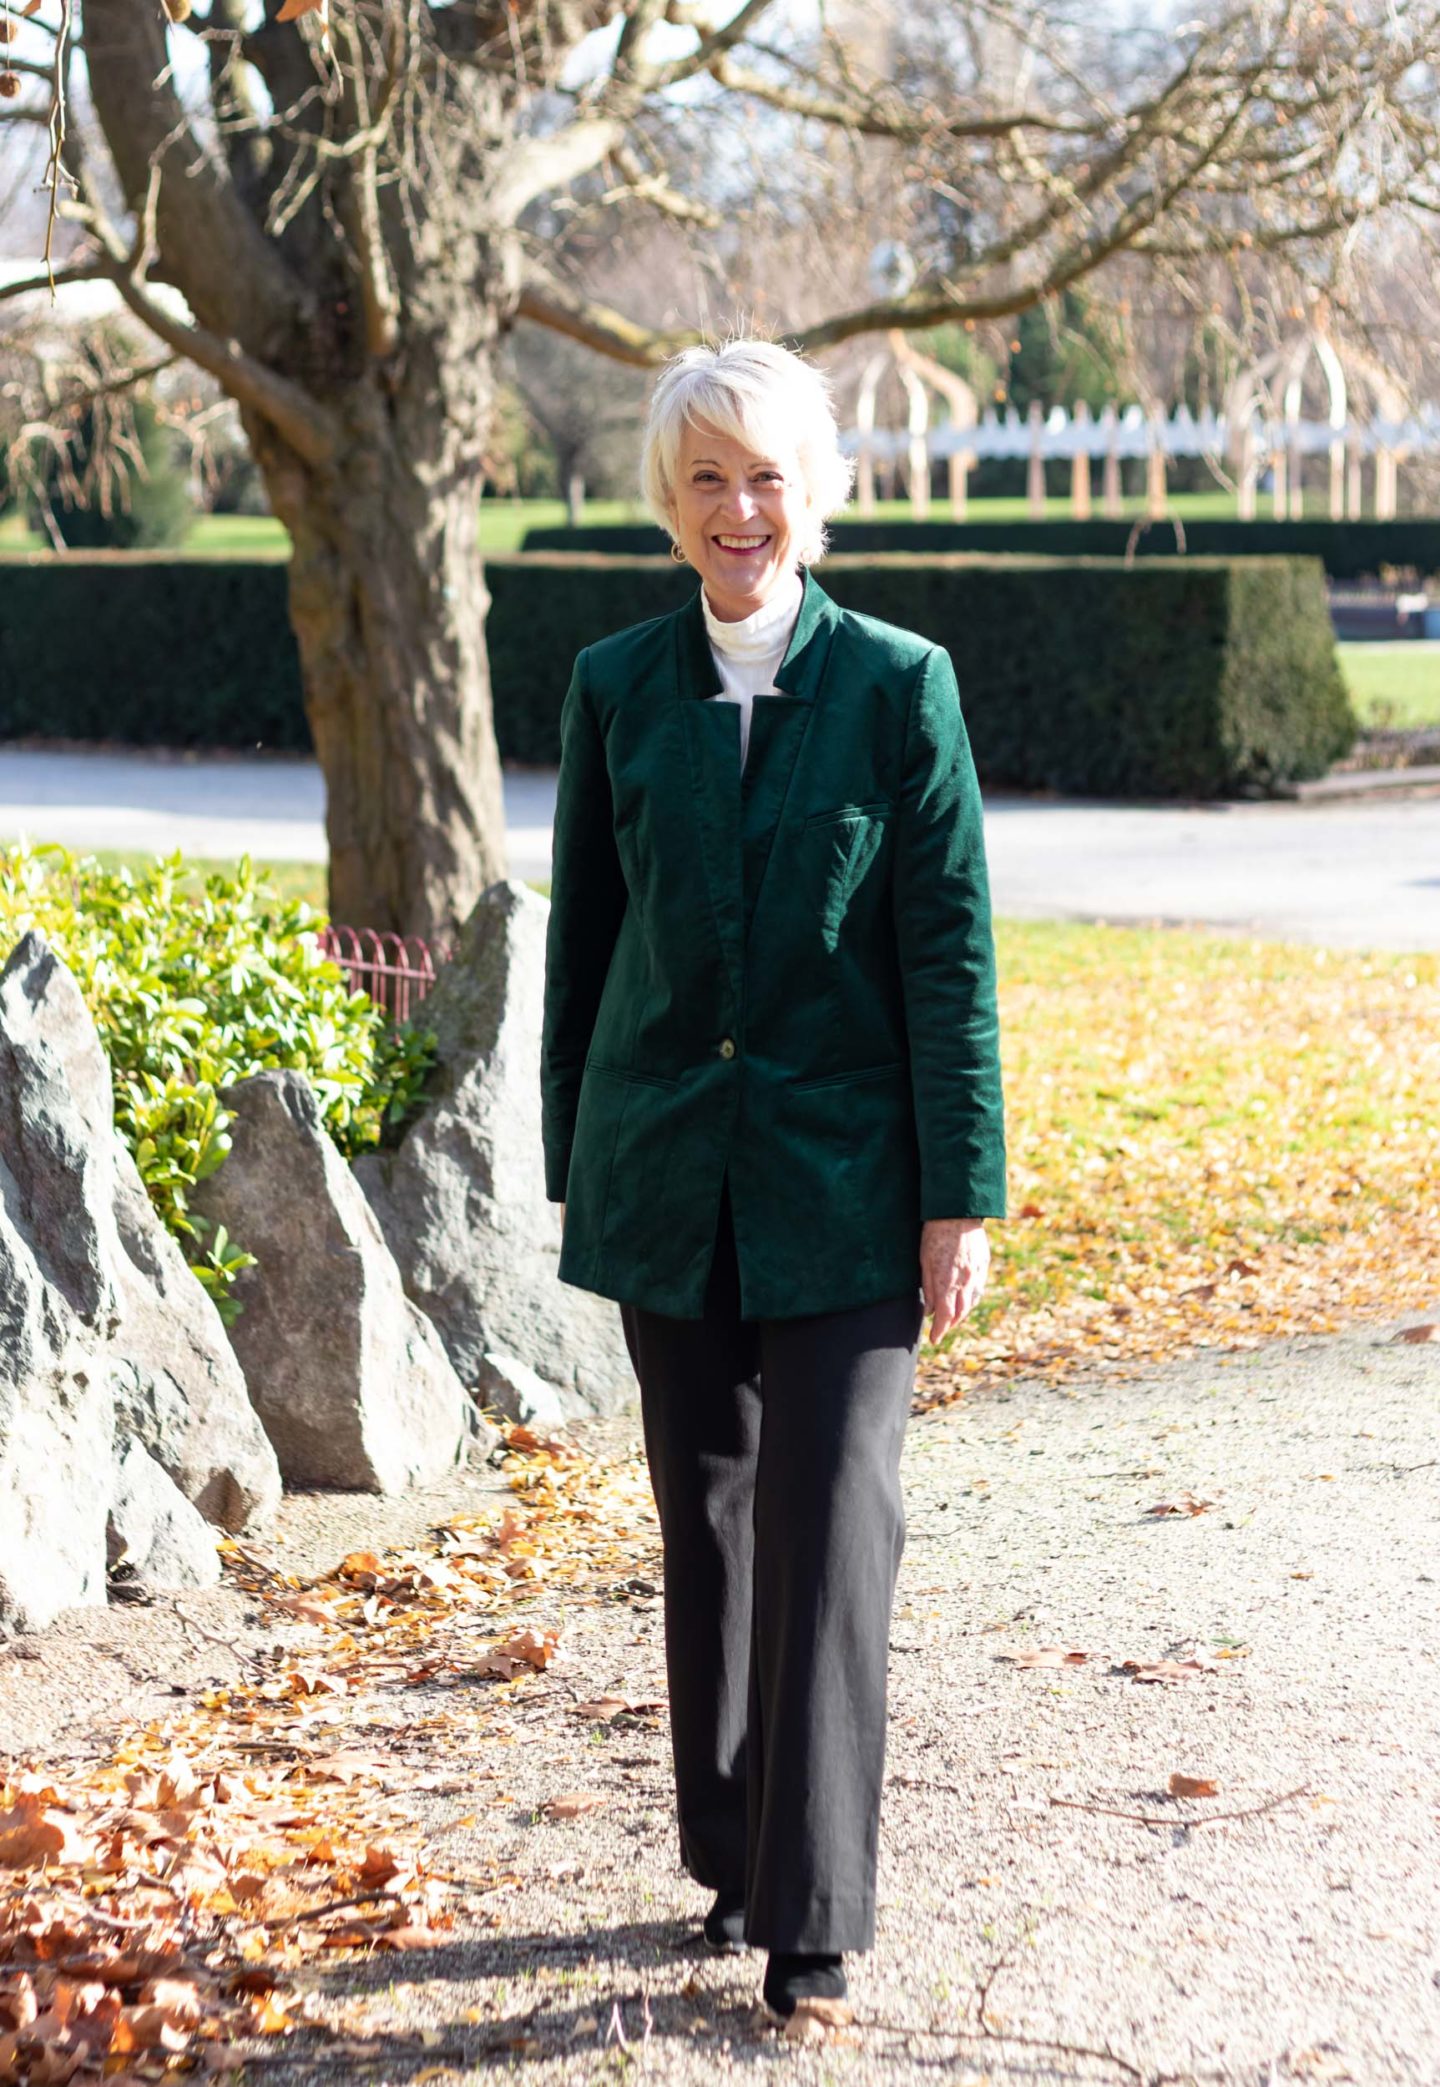 Velvet jackets look so rich and elegant - Chic at any age